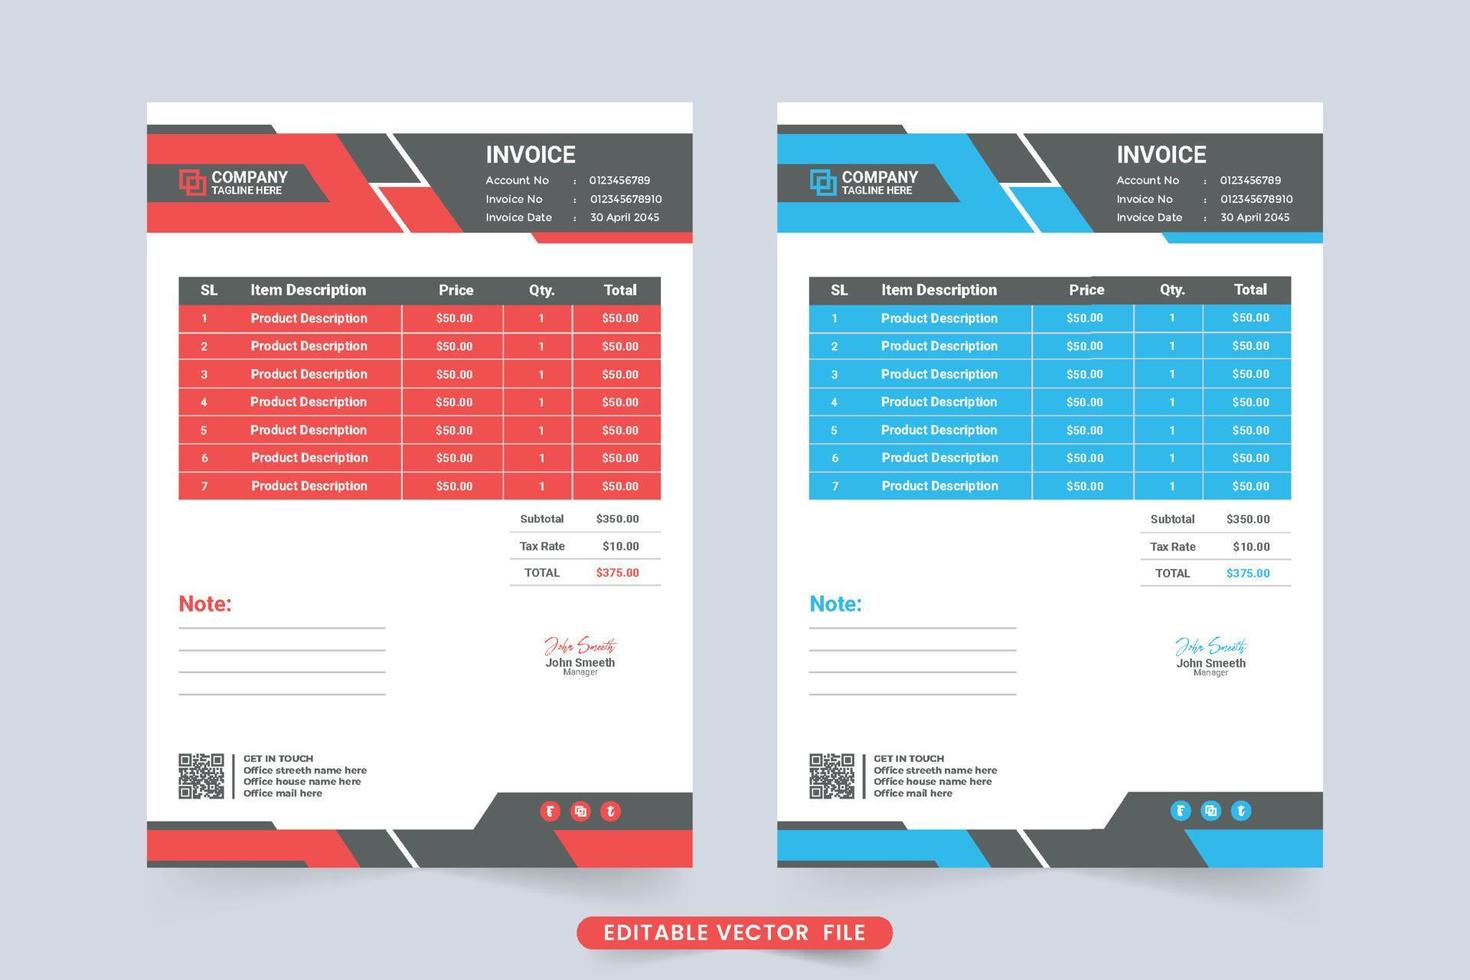 Digital business invoice design with abstract shapes. Creative minimal invoice template with red and blue colors. Print ready payment agreement and billing paper decoration for corporate business. vector